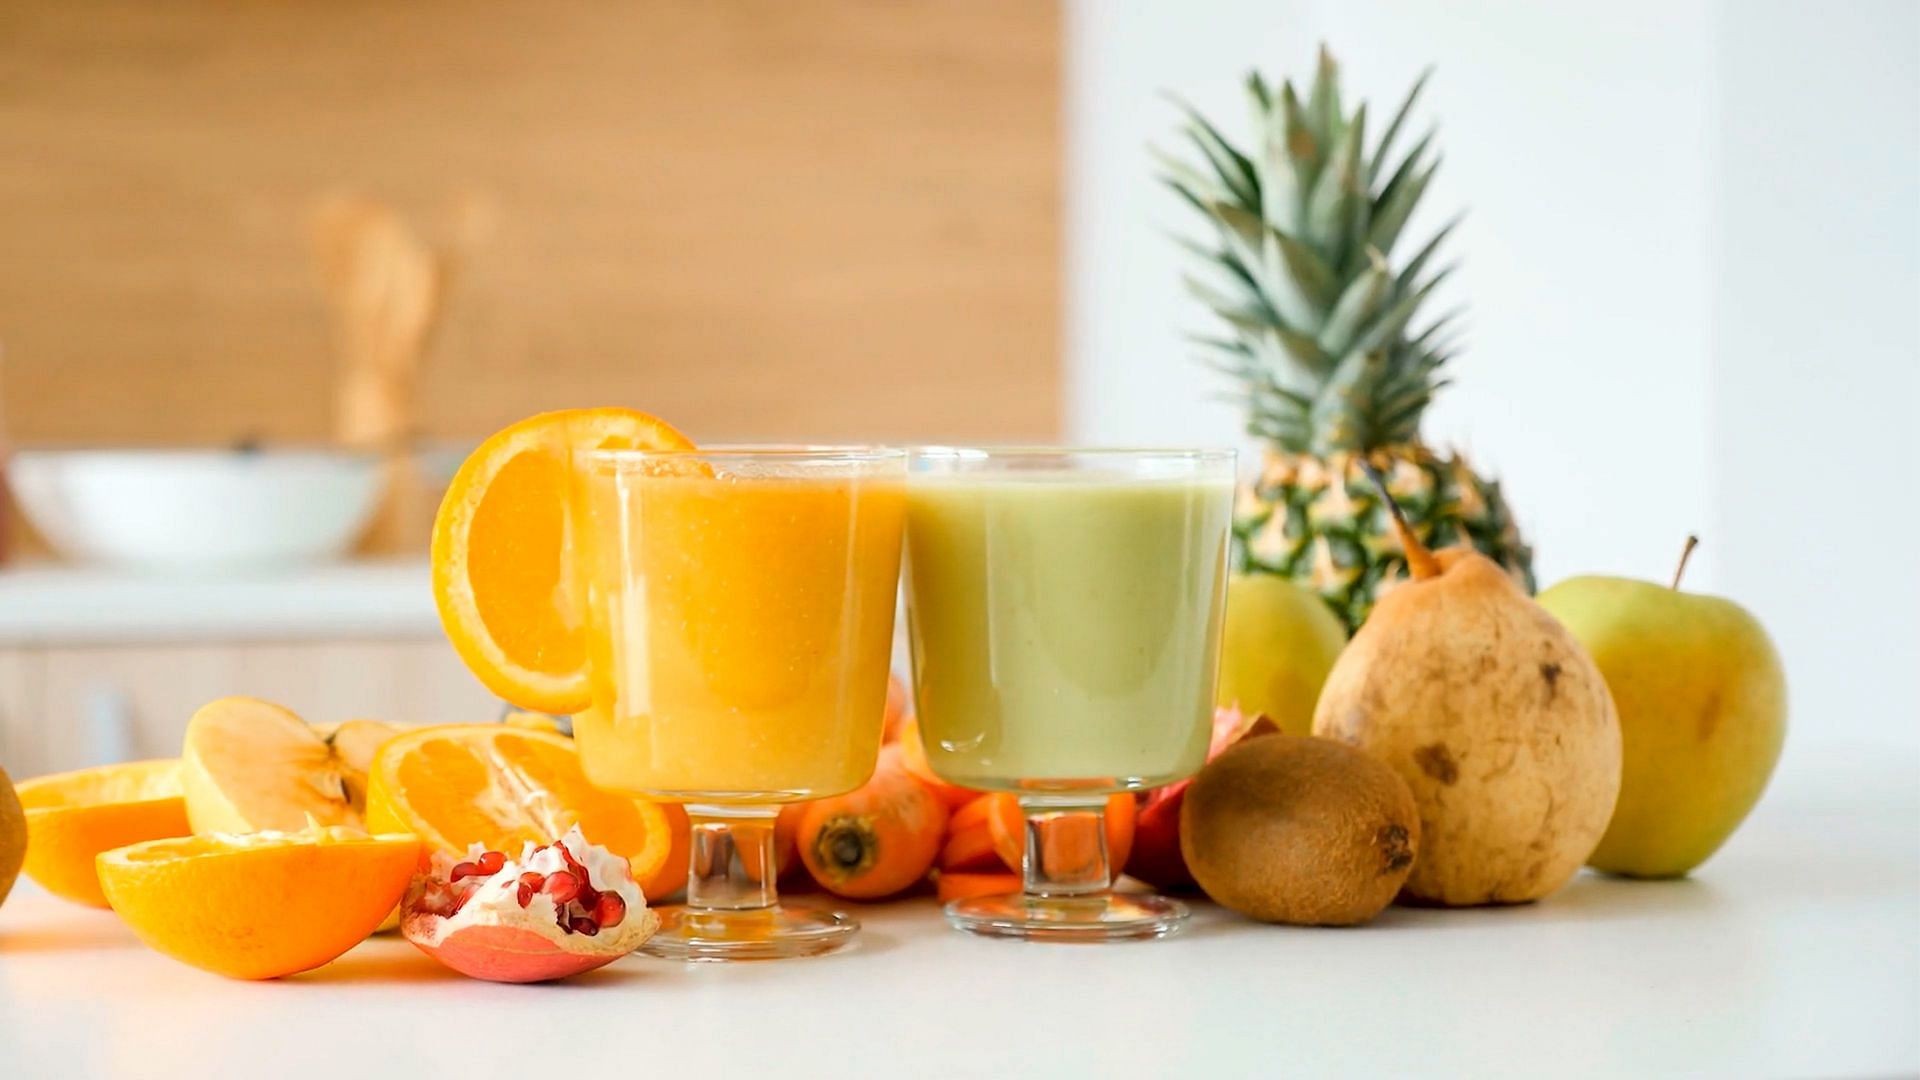 Smoothies made with fresh fruits and vegetables are recommended (Image via Unsplash/Jugoslocos)